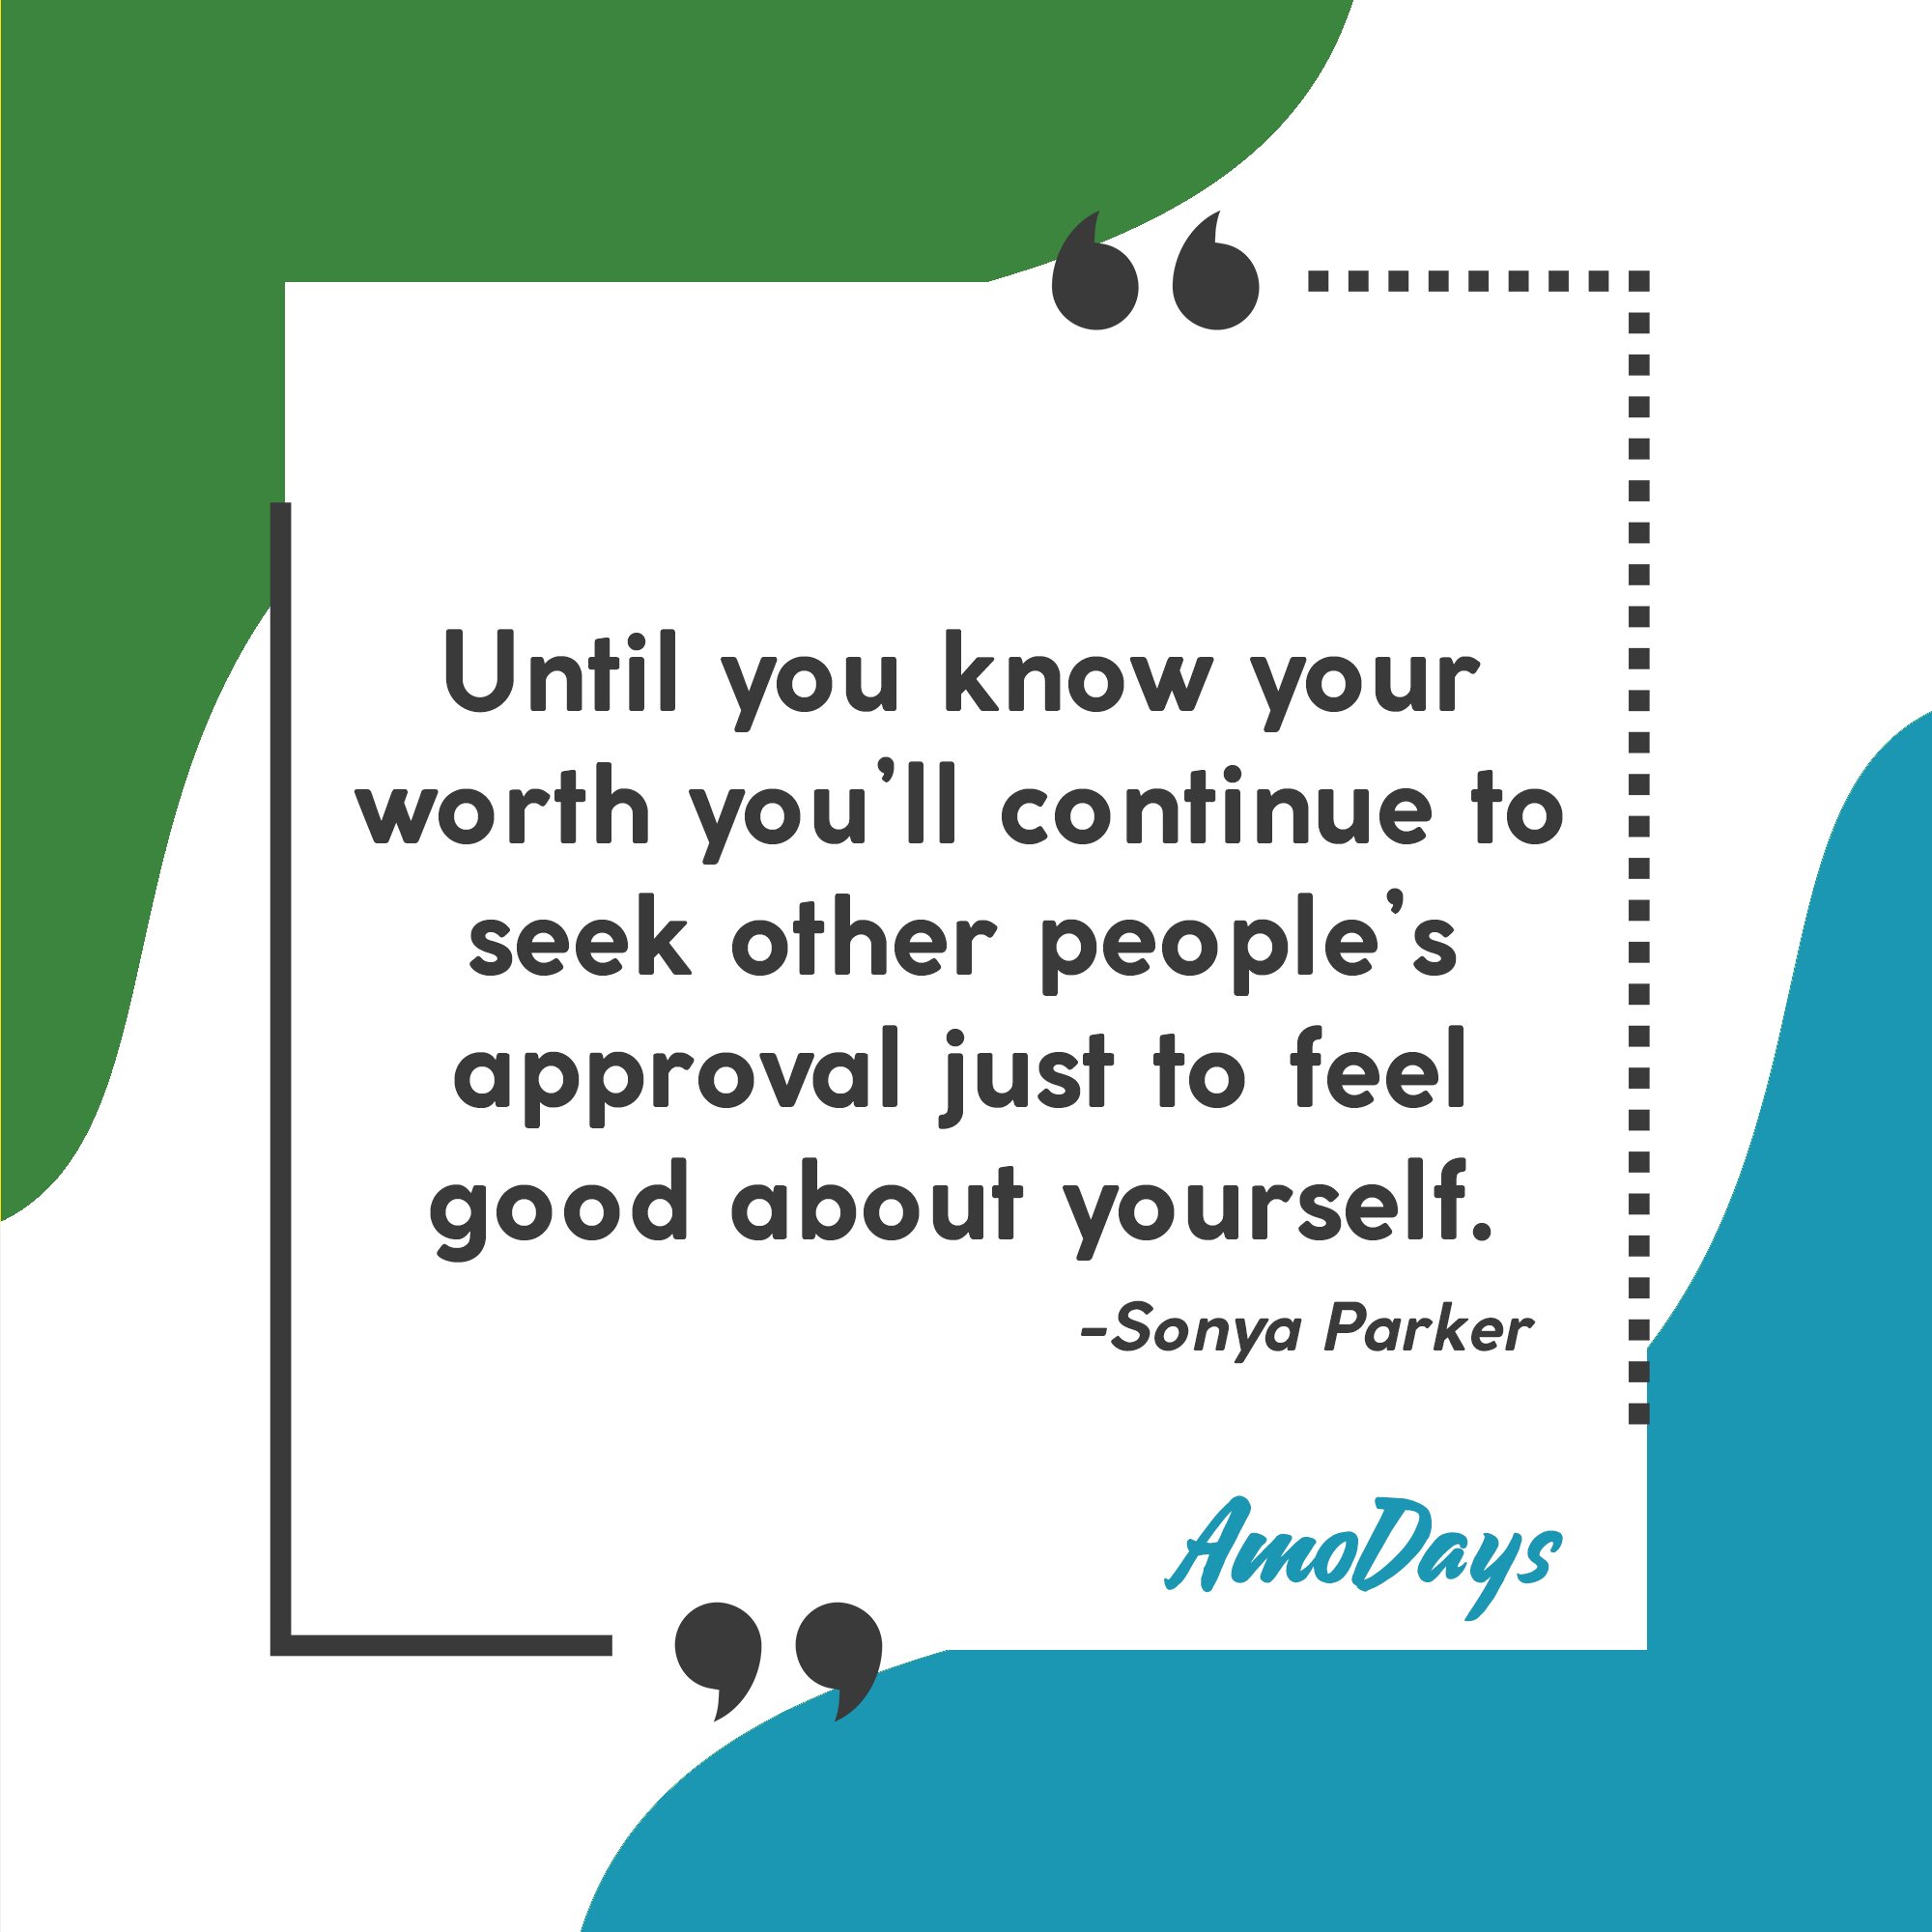 Sonya Parker's quote “Until you know your worth you’ll continue to seek other people’s approval just to feel good about yourself.” | Image: AmoDays